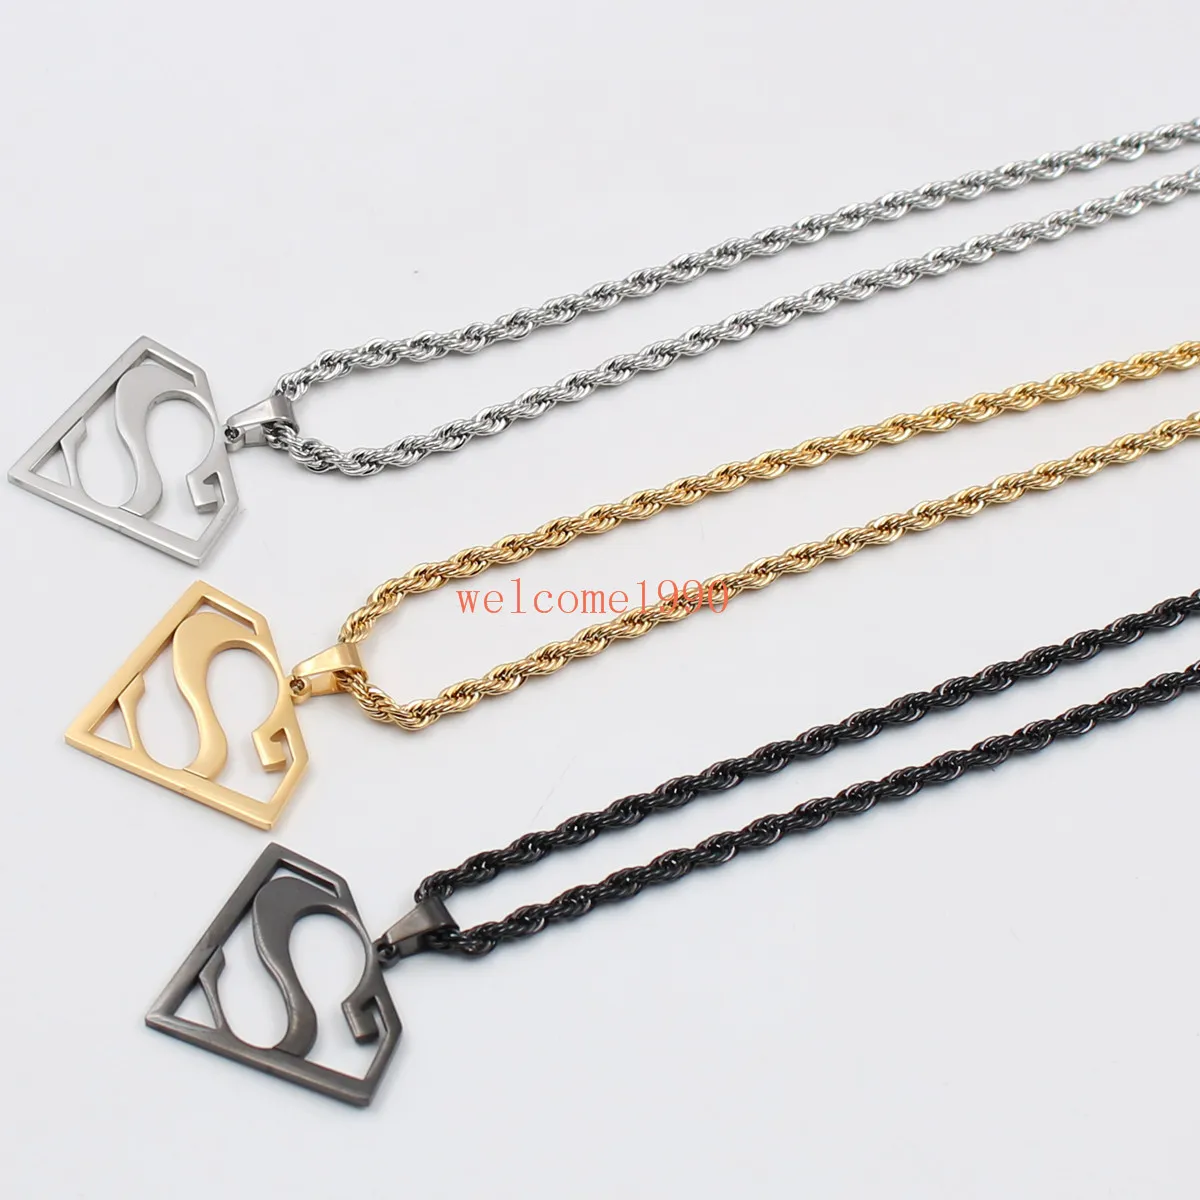 choose Gold silver black Stainless Steel 15 inch Superman logo Pendant Men039s Gifts Fashion Rope chain necklace 22 inch 4mm5622829